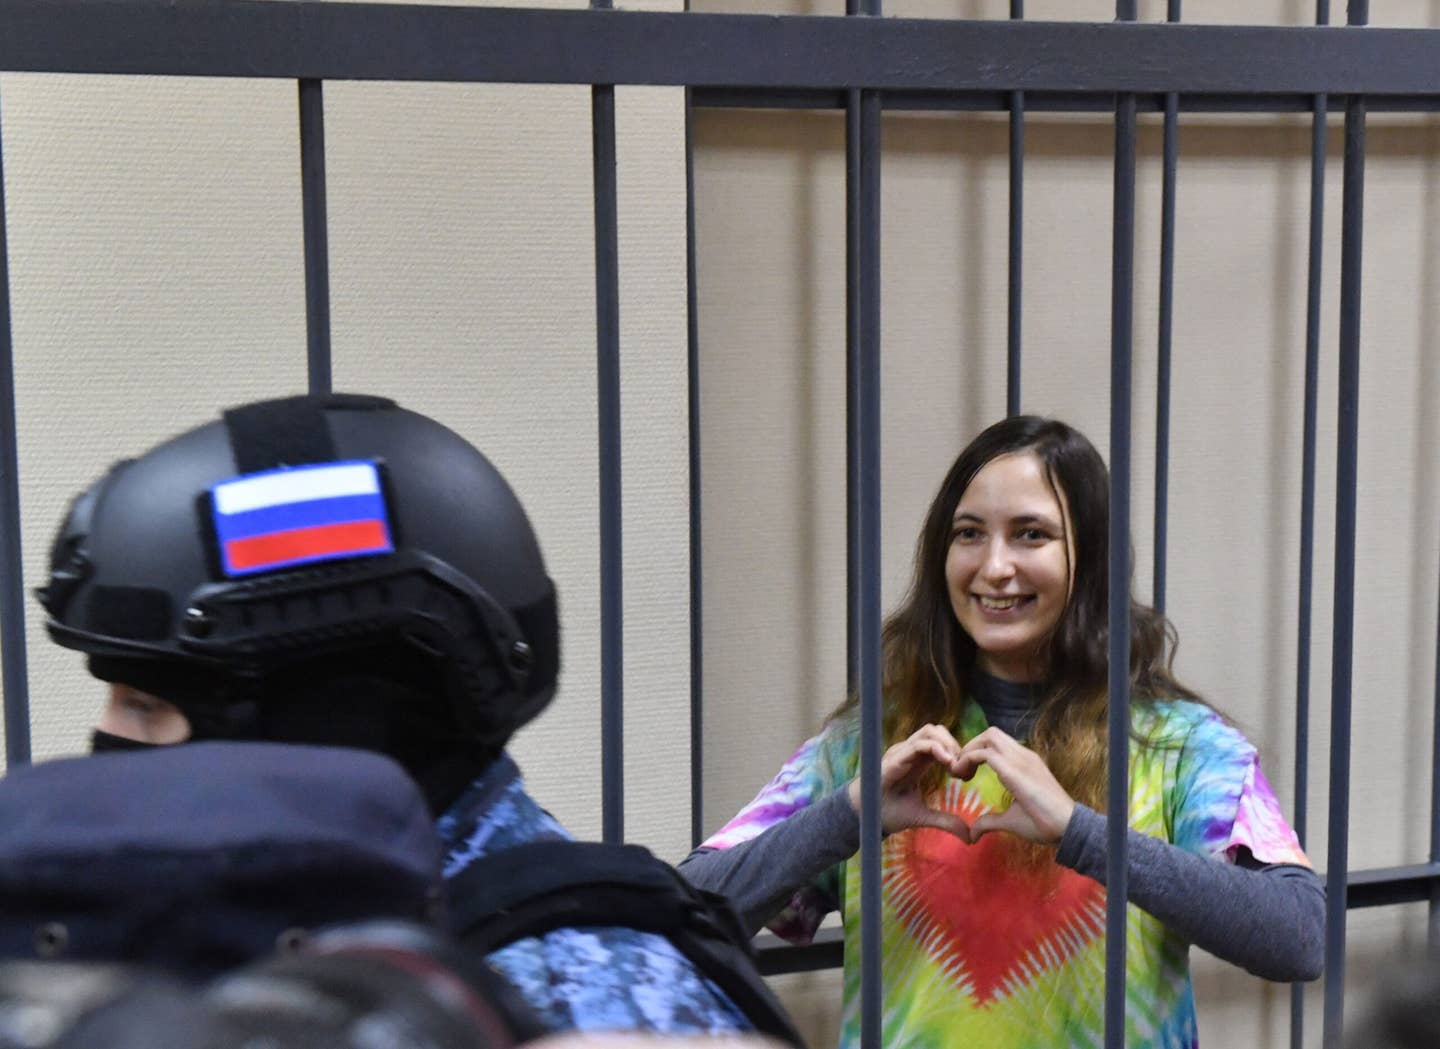 Russian artist Alexandra Skochilenko, 33, accused of spreading disinformation about the Russian Army for changing supermarket price tags with messages criticizing the Russian military offensive in Ukraine, gestures from inside a defendants’ cage during her verdict hearing at a court in Saint Petersburg on November 16, 2023. <em>Photo by OLGA MALTSEVA/AFP via Getty Images</em>